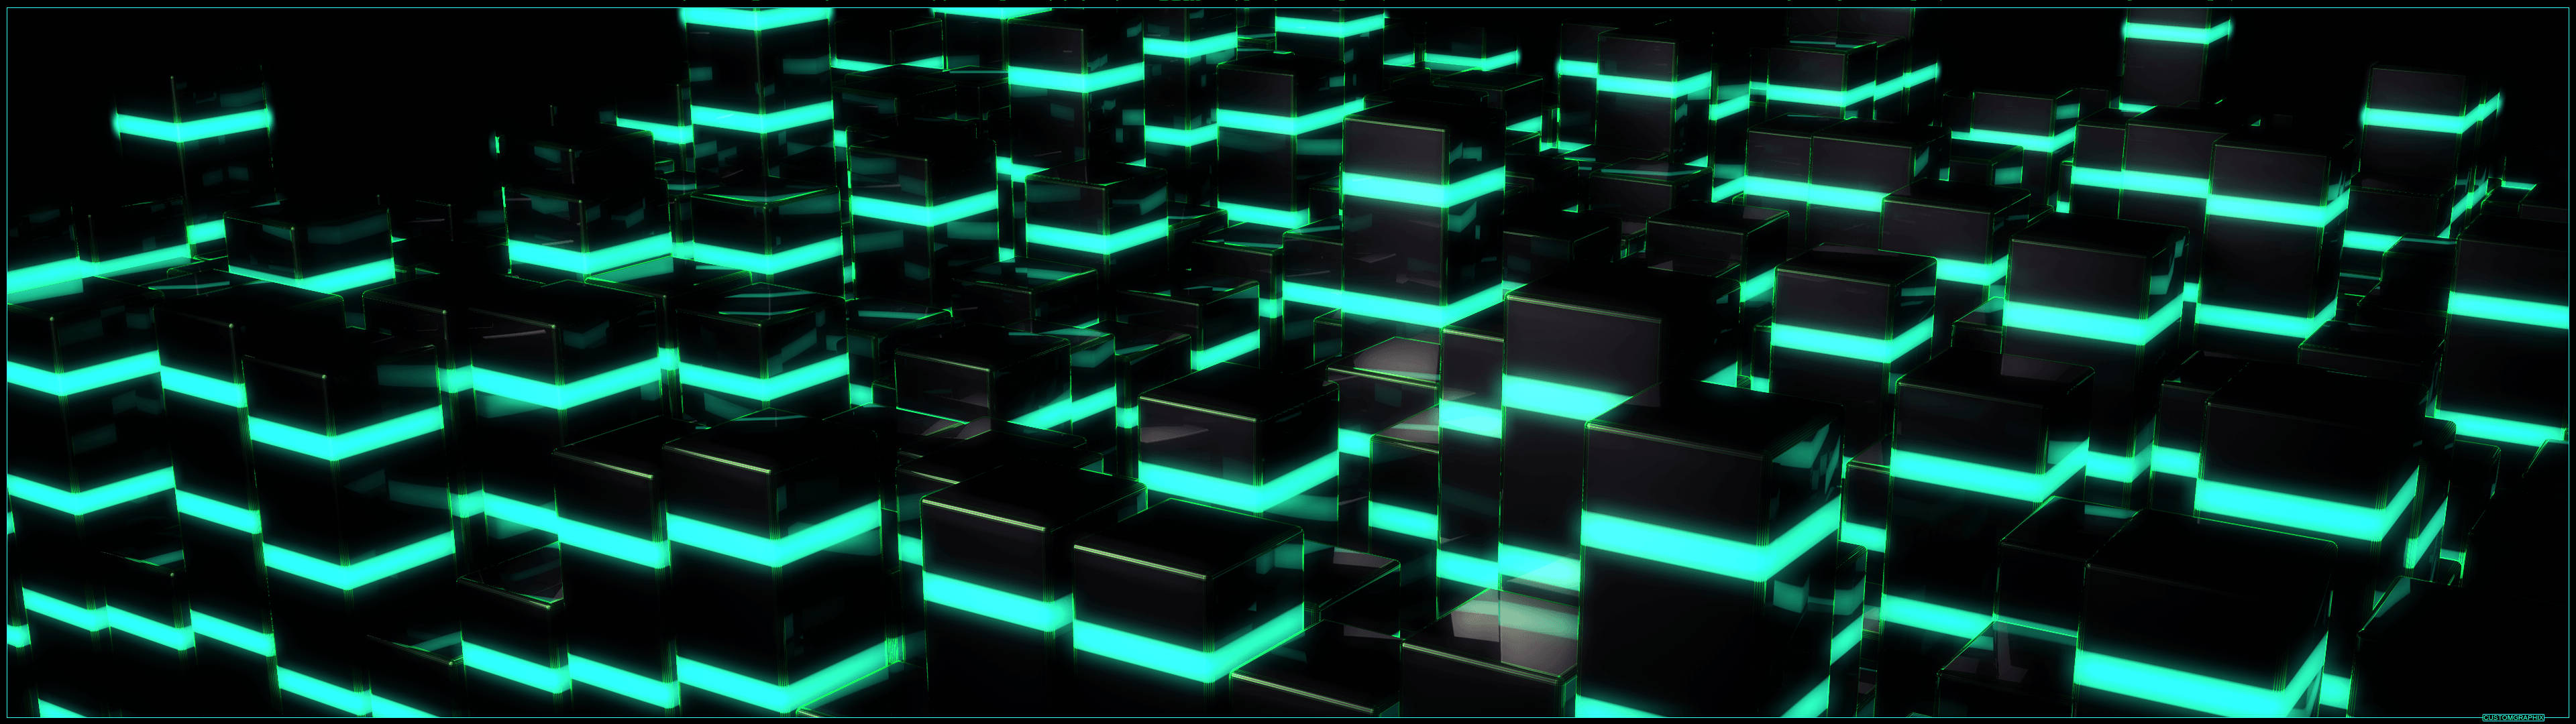 3840X1080 Neon Wallpaper and Background